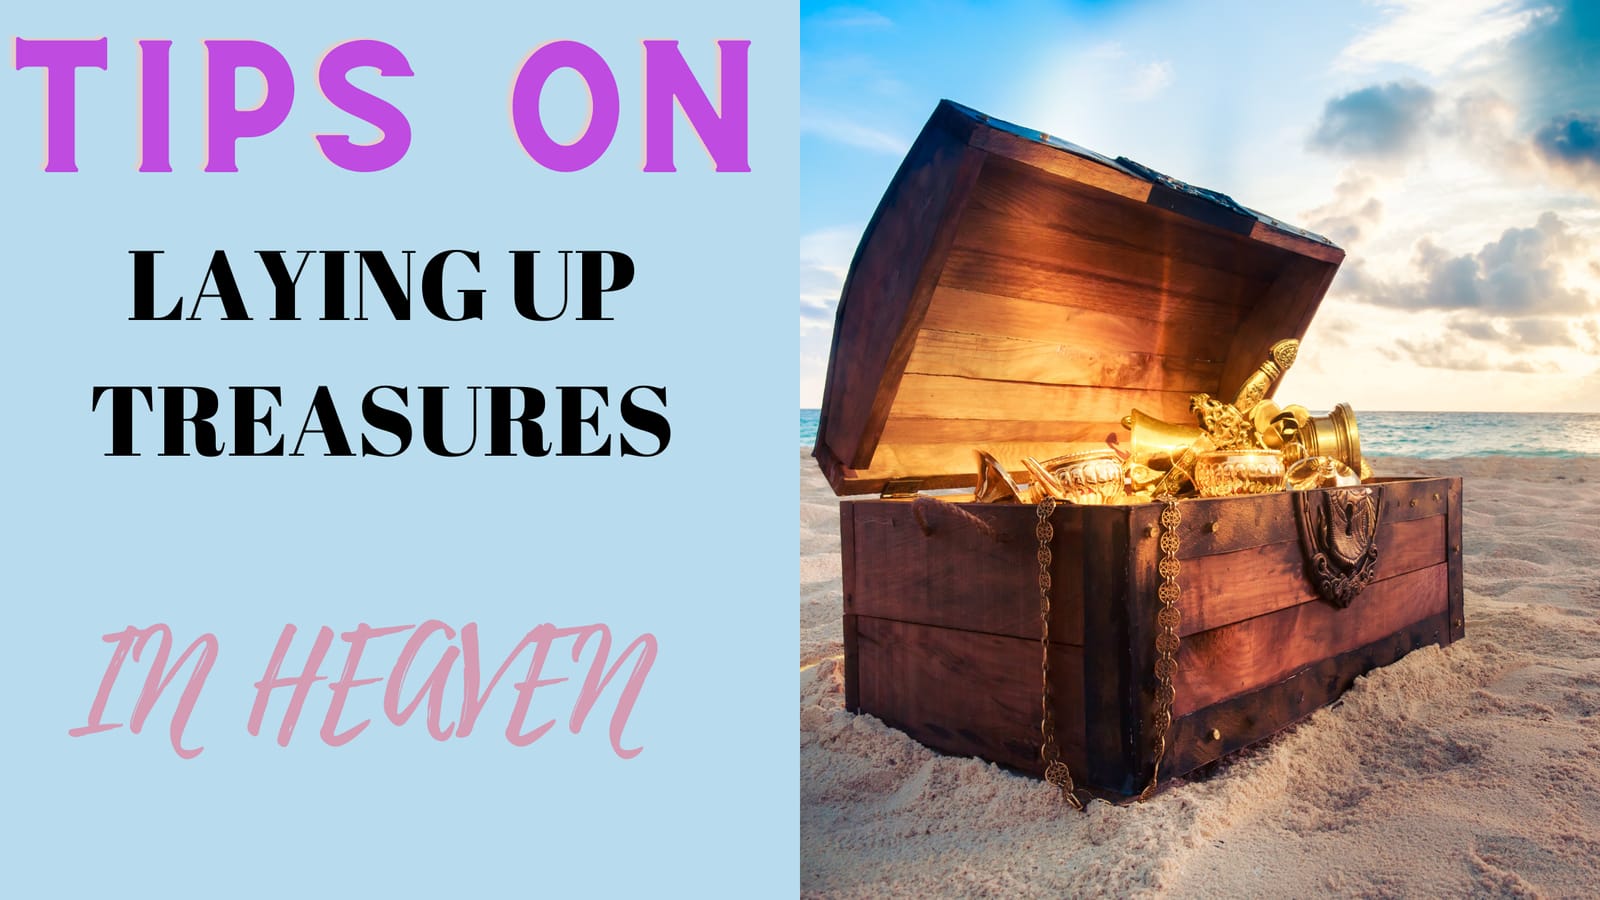 You are currently viewing TIPS ON HOW TO LAY UP TREASURES IN HEAVEN